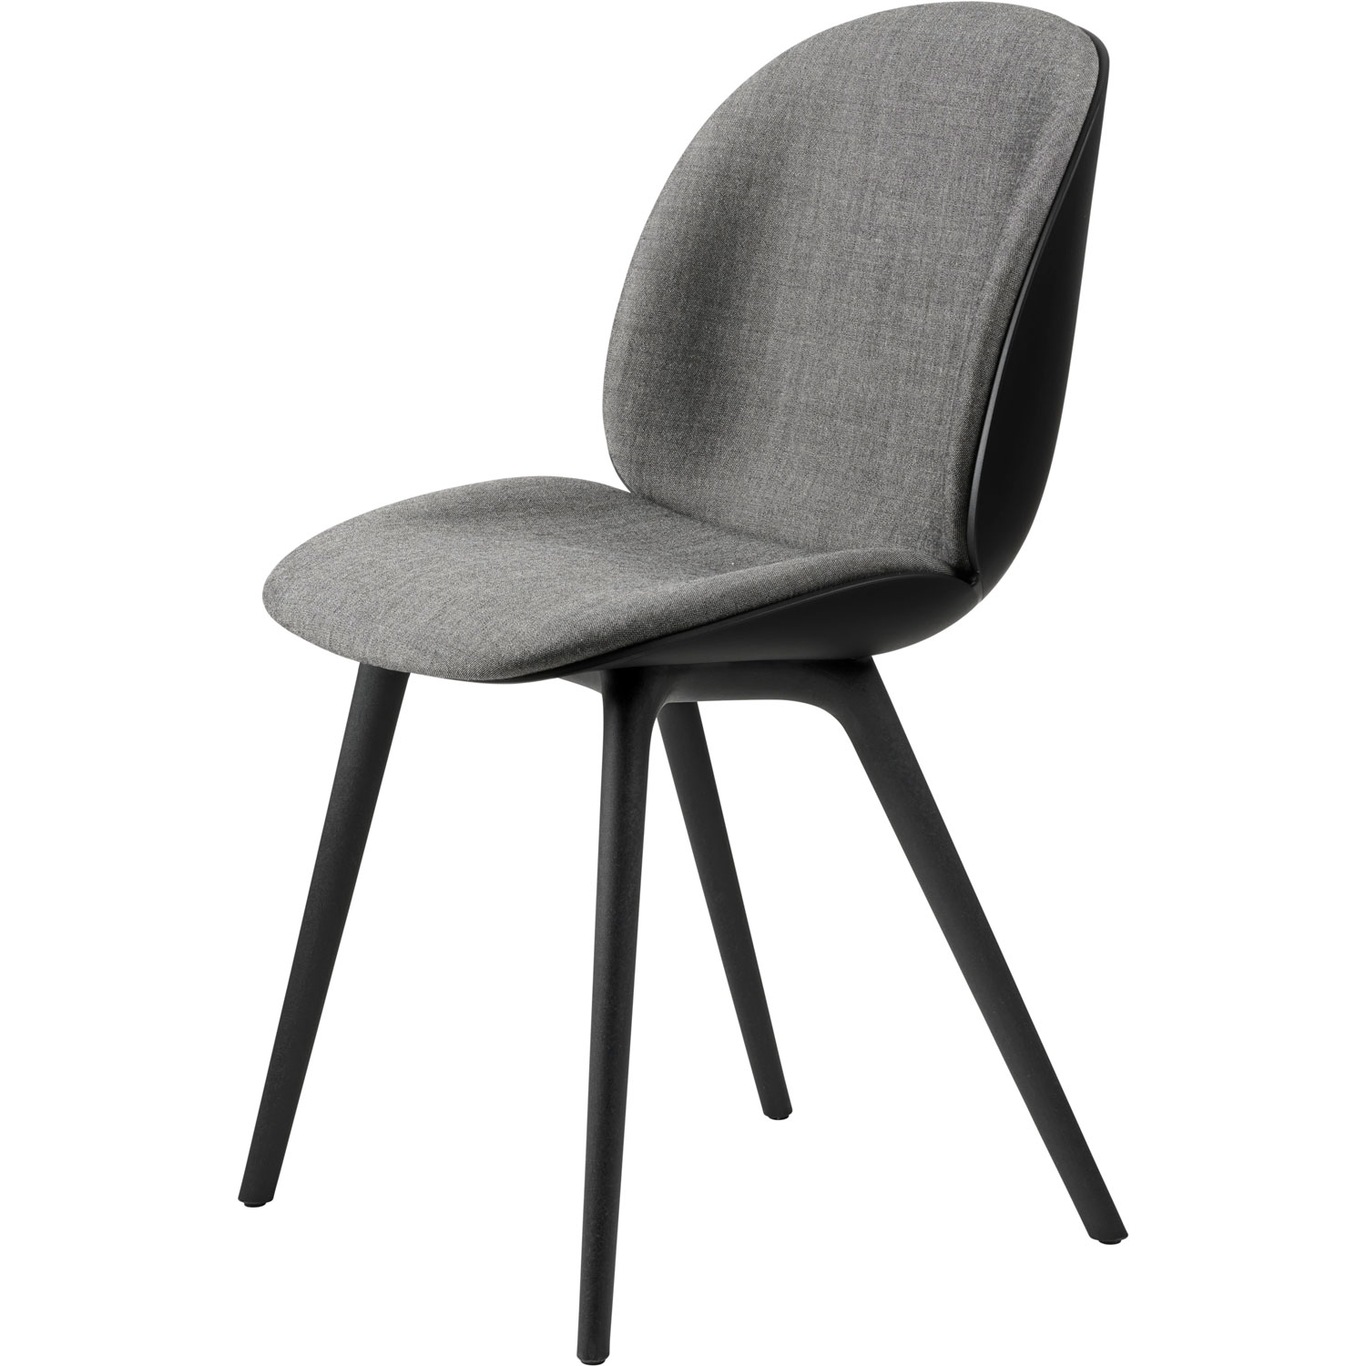 Beetle Chair Upholstered Front / Plastic Base, Remix 3 152